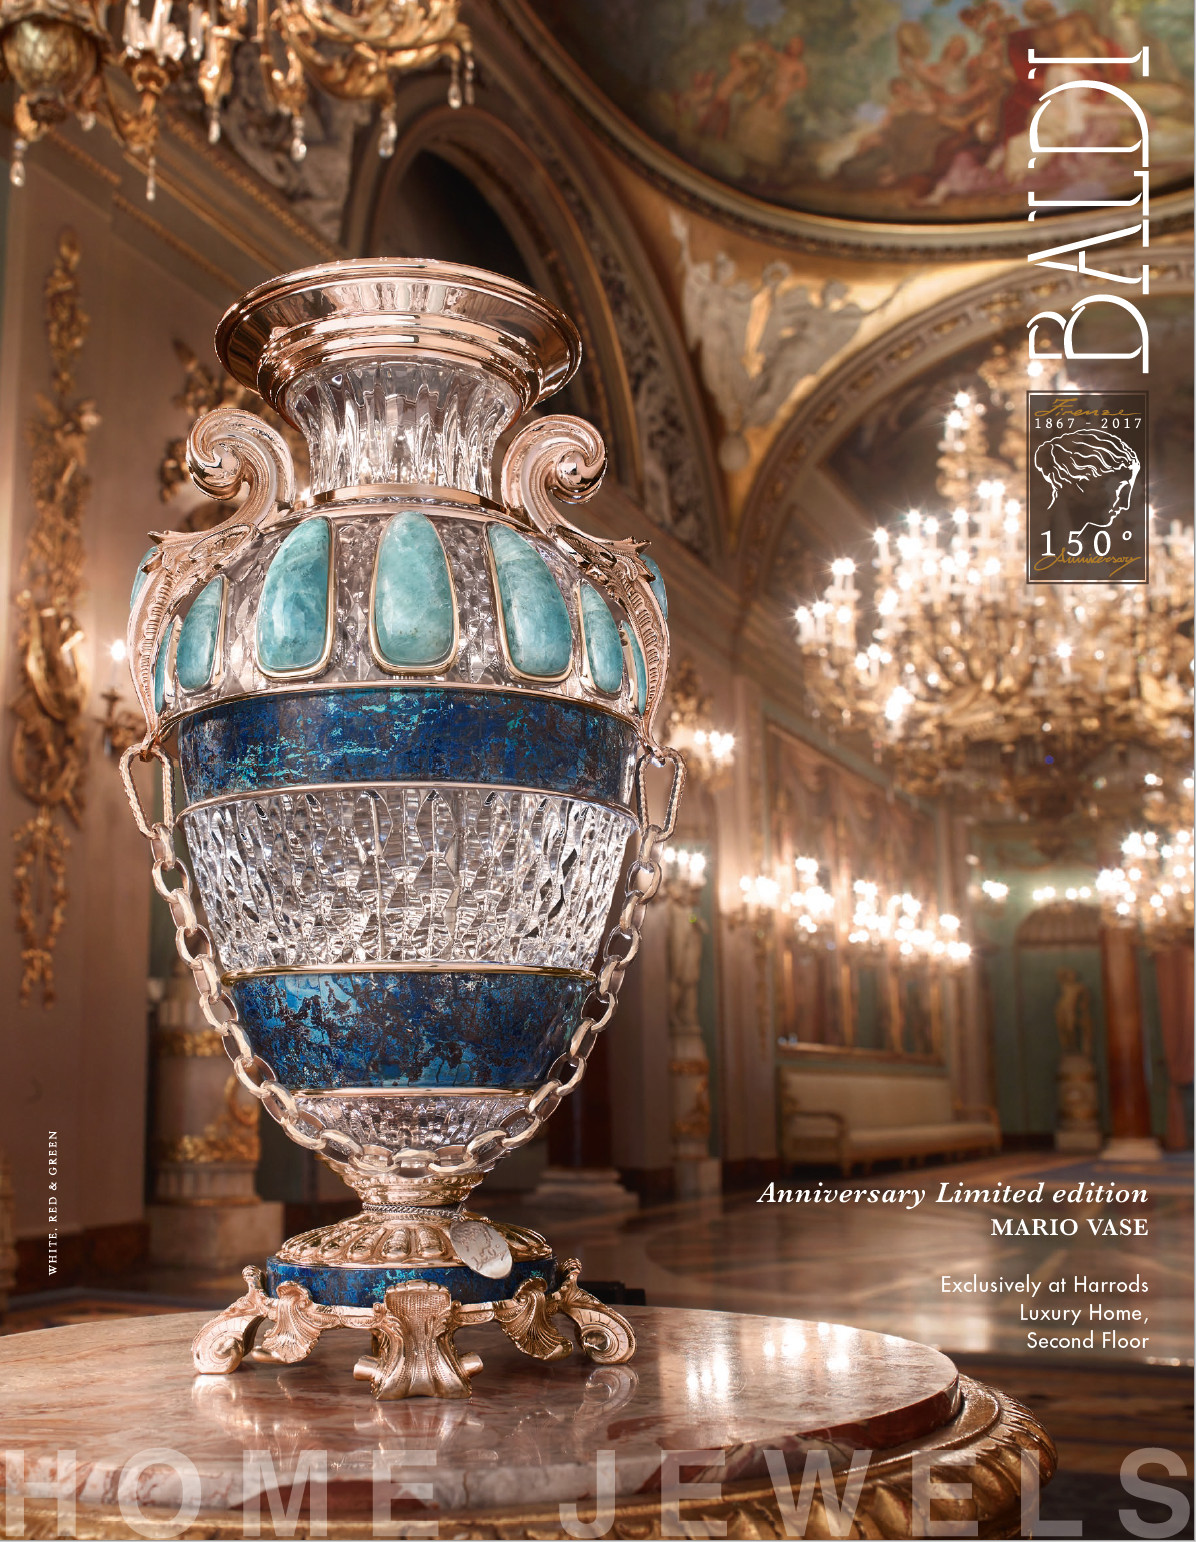 26 Amazing Large Red Vases for Sale 2024 free download large red vases for sale of baldi home jewels mario vase firenze page harrods magazine intended for baldi home jewels mario vase firenze page harrods magazine